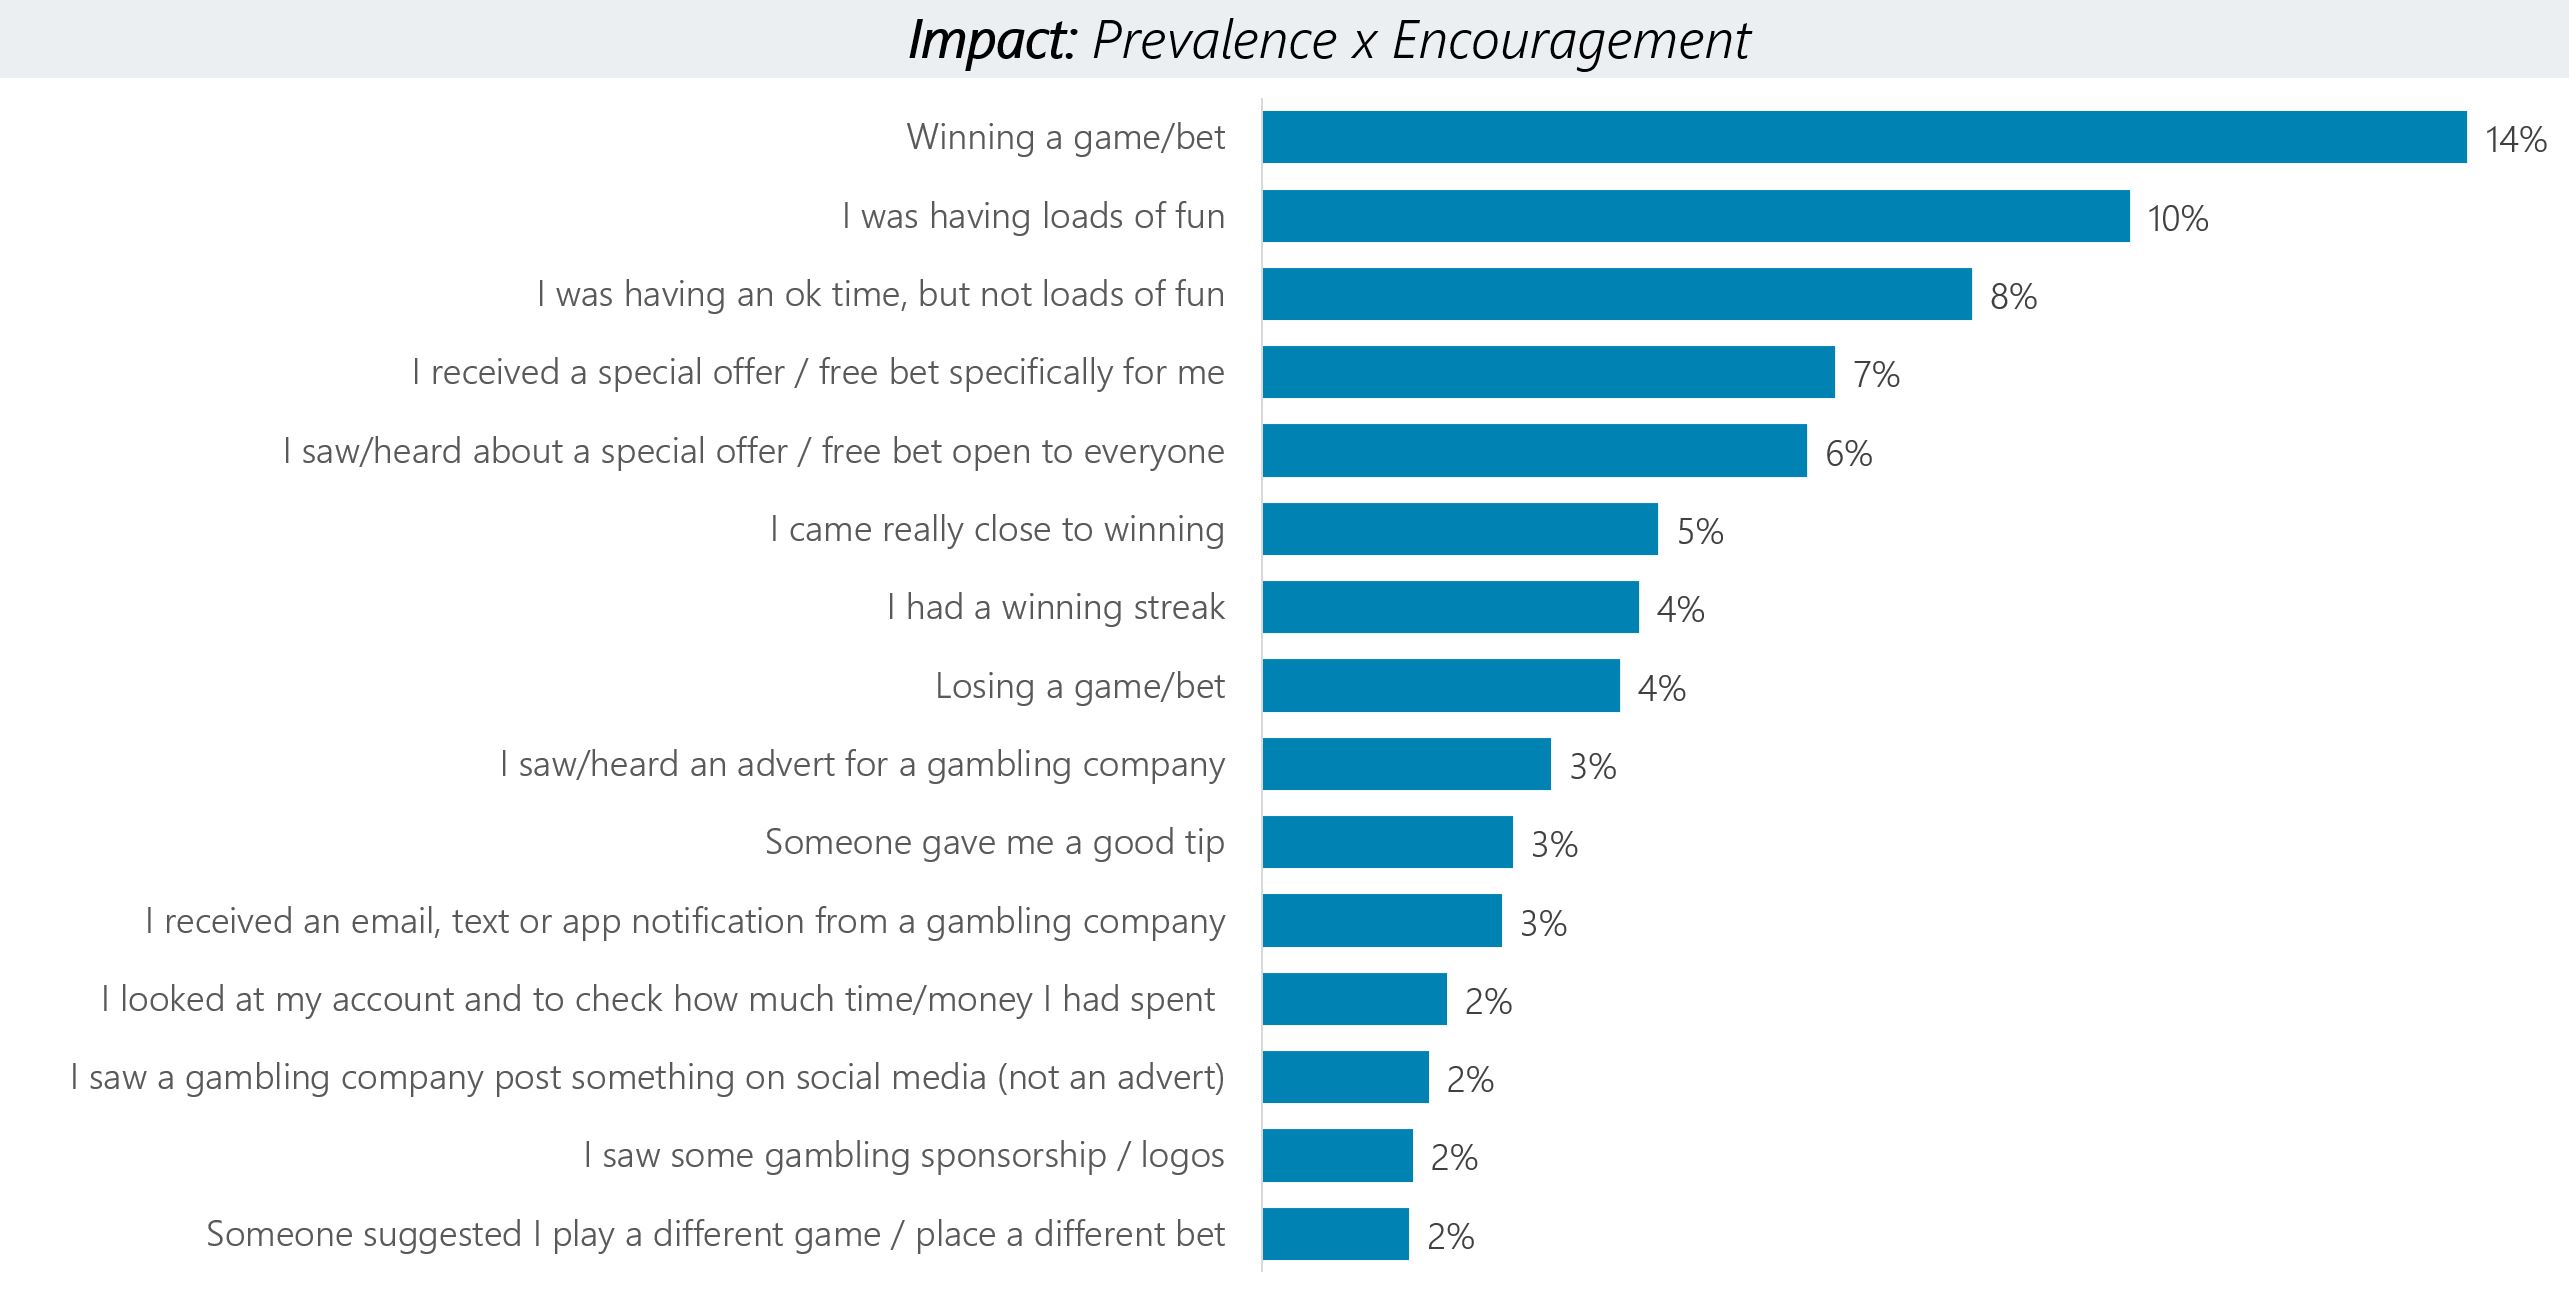 A chart showing play experience Impact (Prevalence x Encouragement) Factors. Data from the chart is provided within the following table.